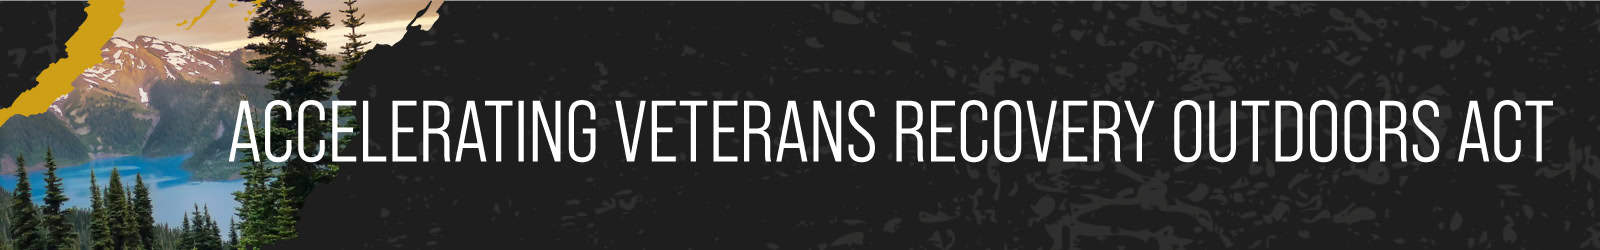 Accelerating Veterans Recovery Outdoors Act